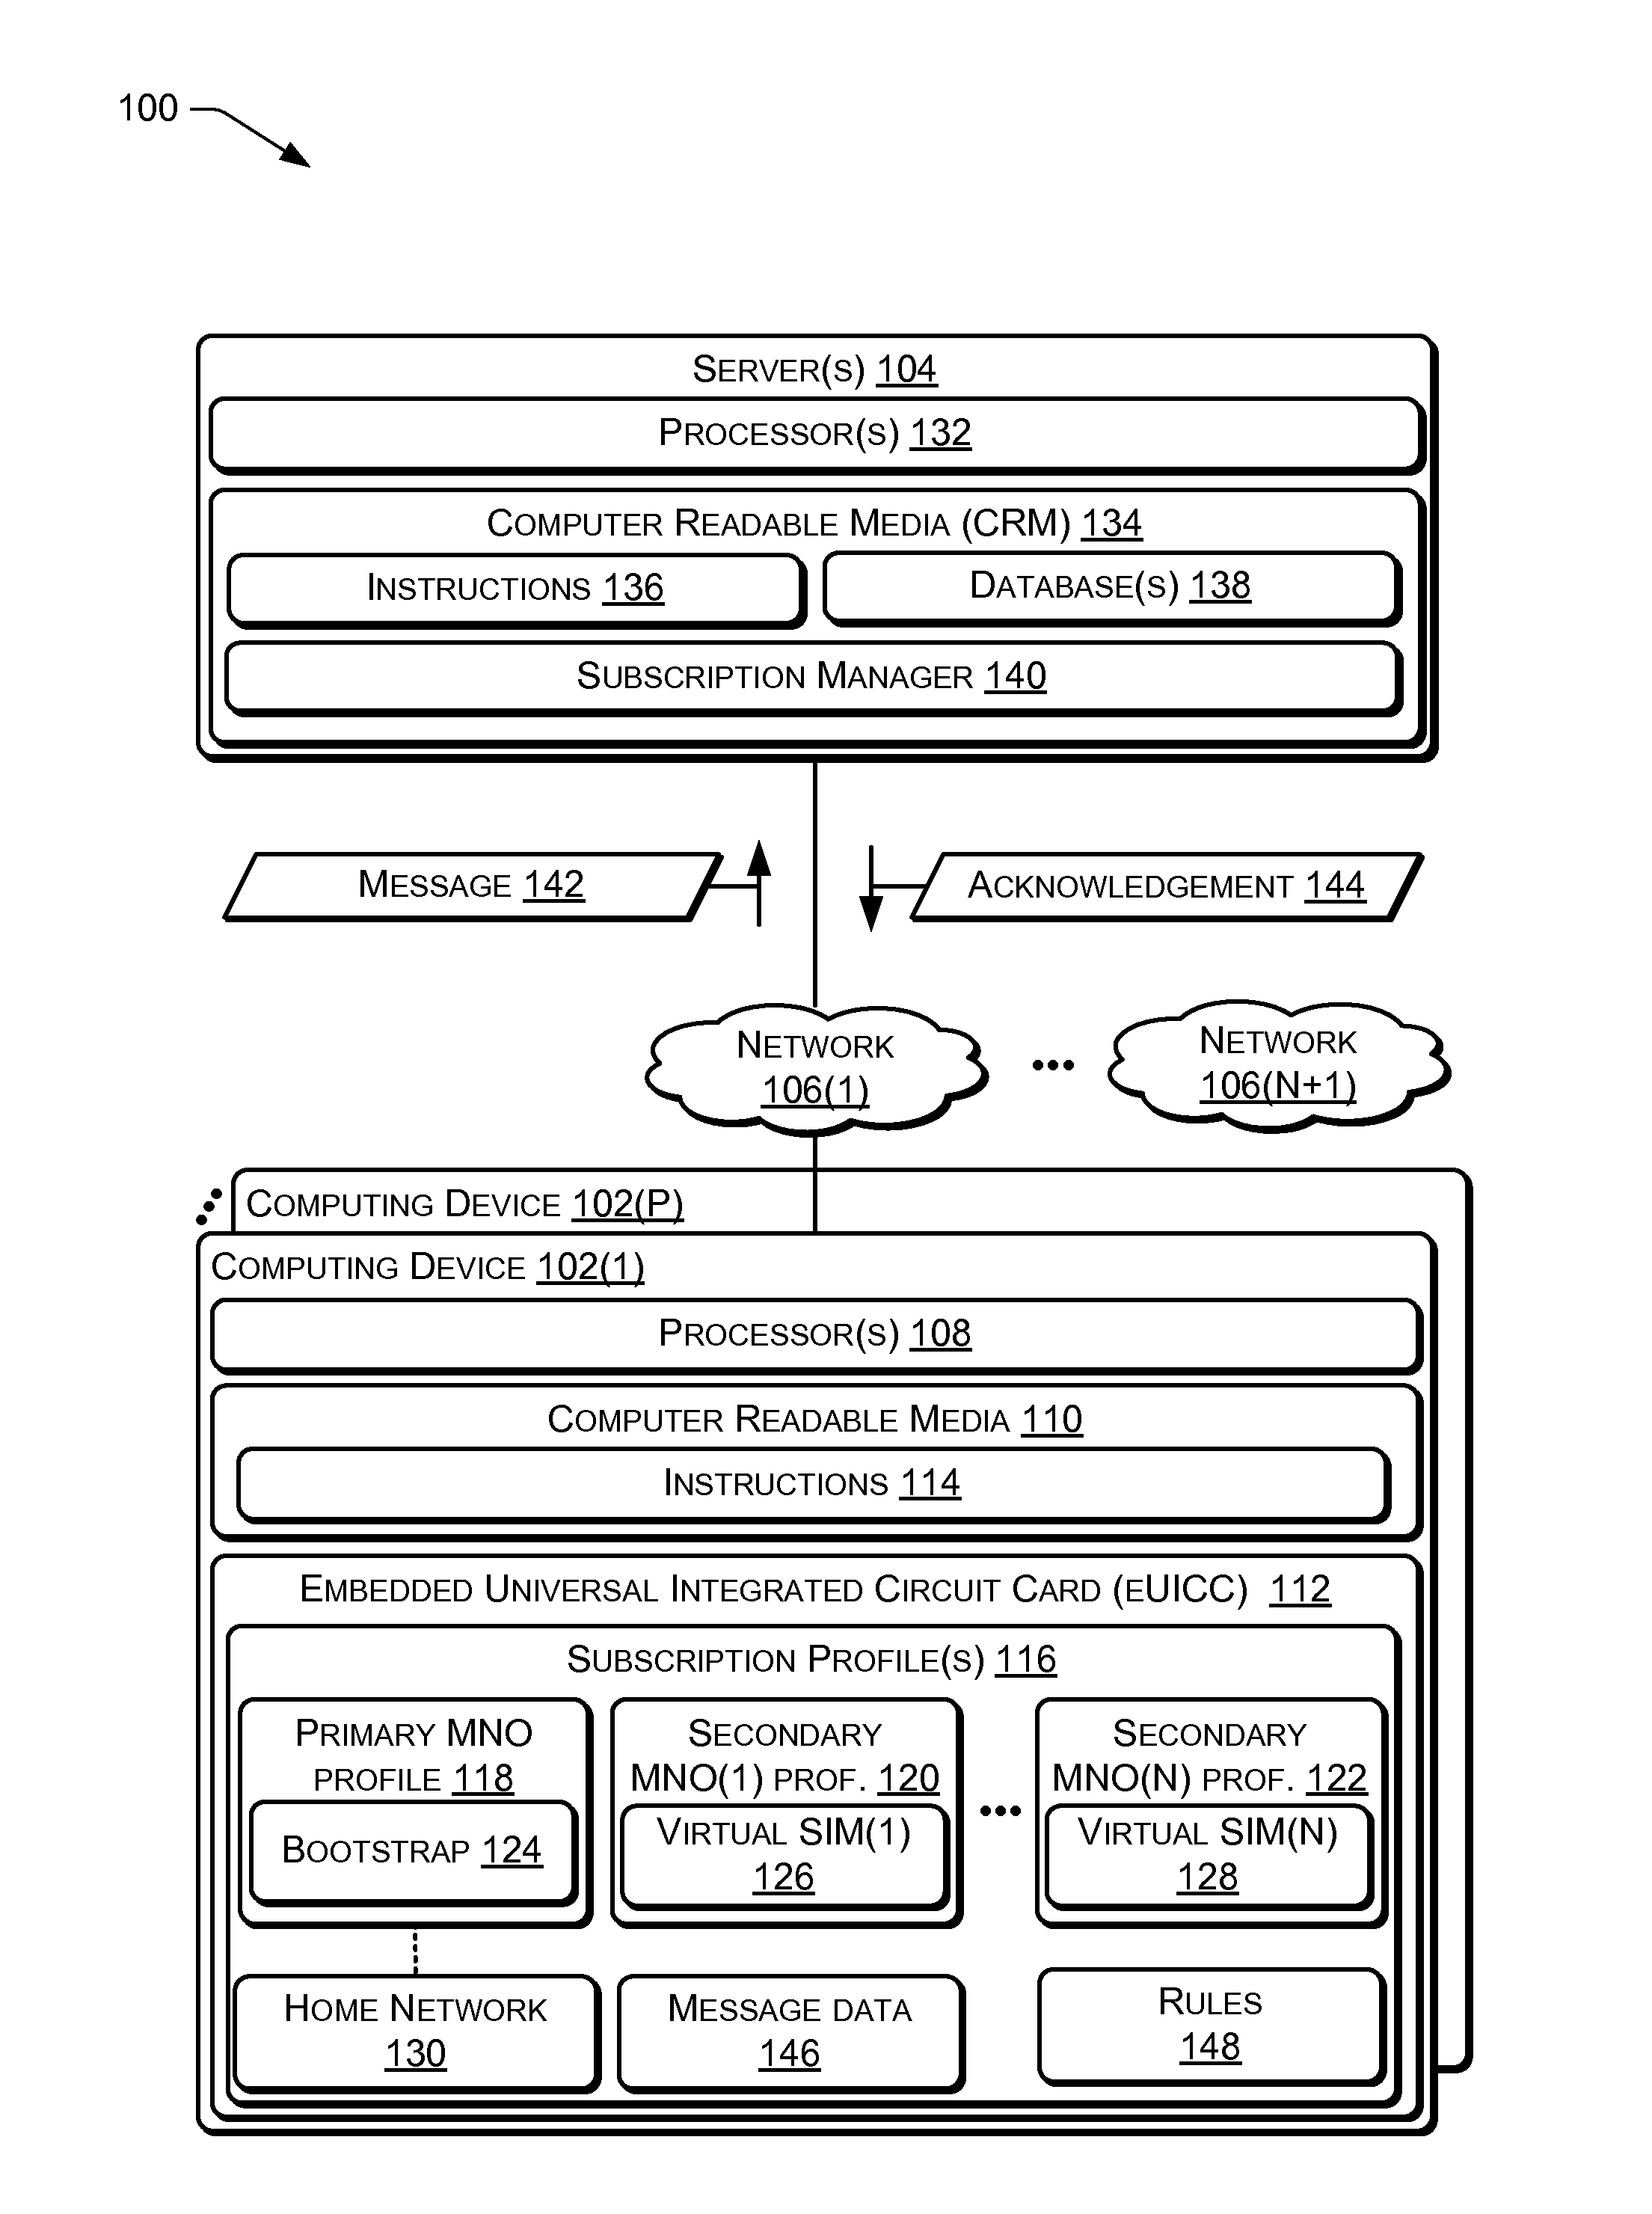 Polling by Universal Integrated Circuit Card for Remote Subscription